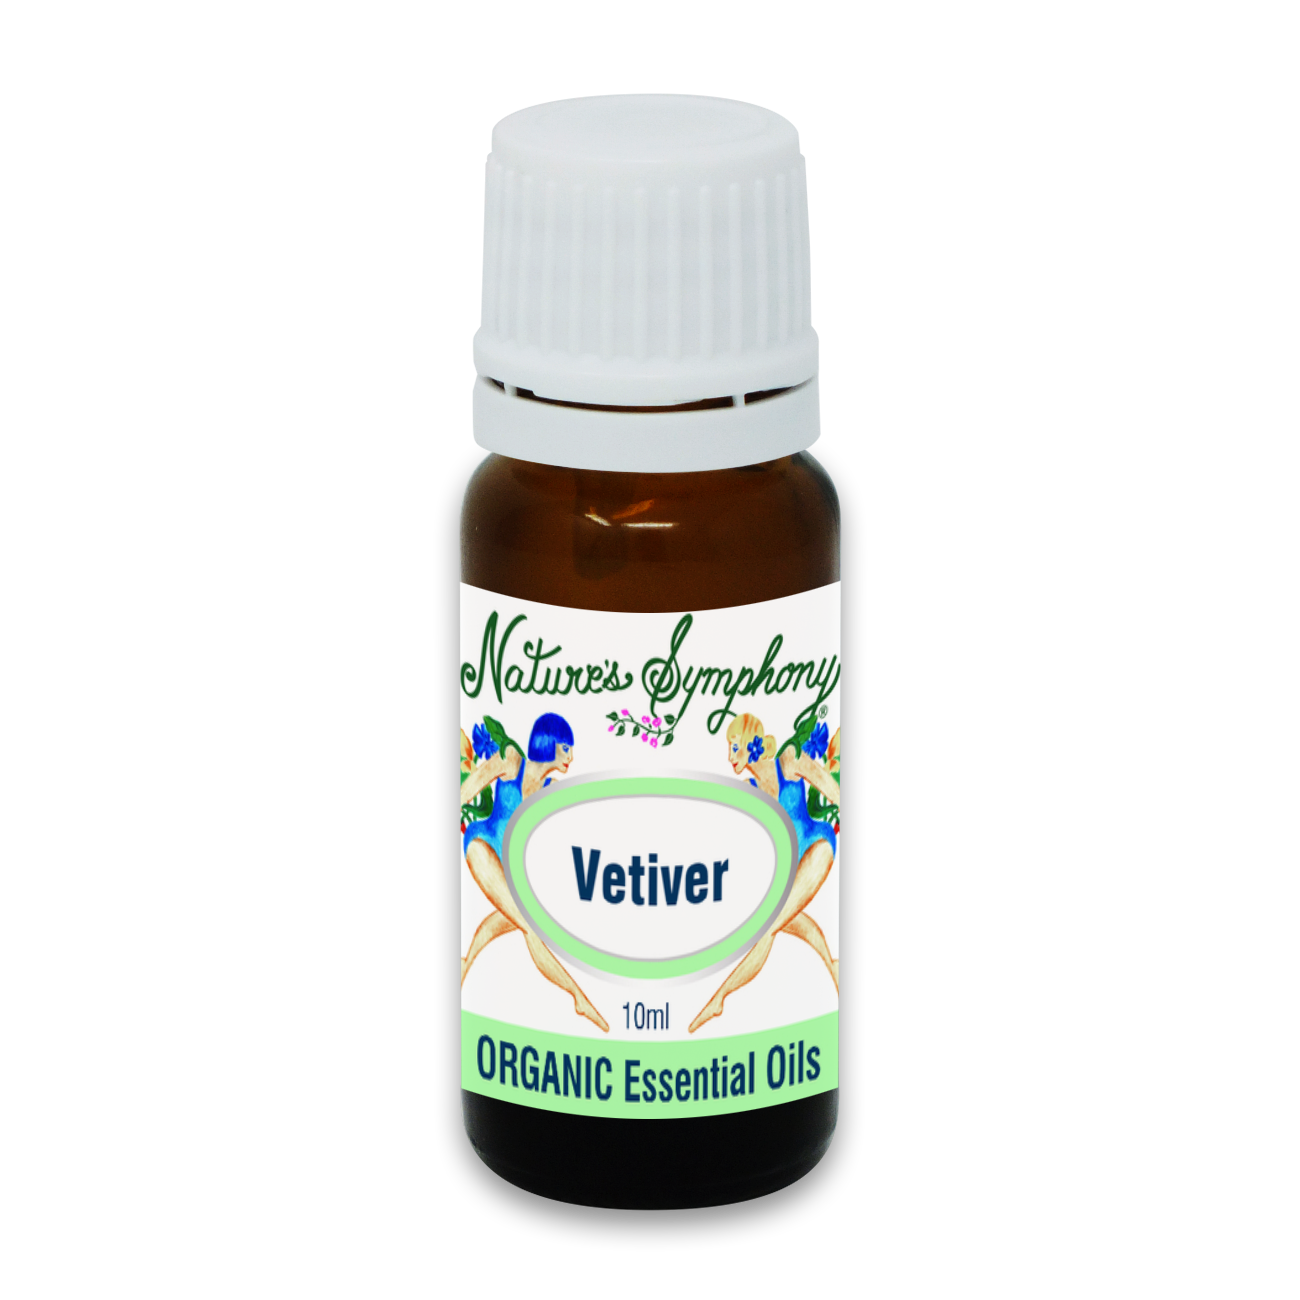 Vetiver, Organic/Wildcrafted oil - 10ml